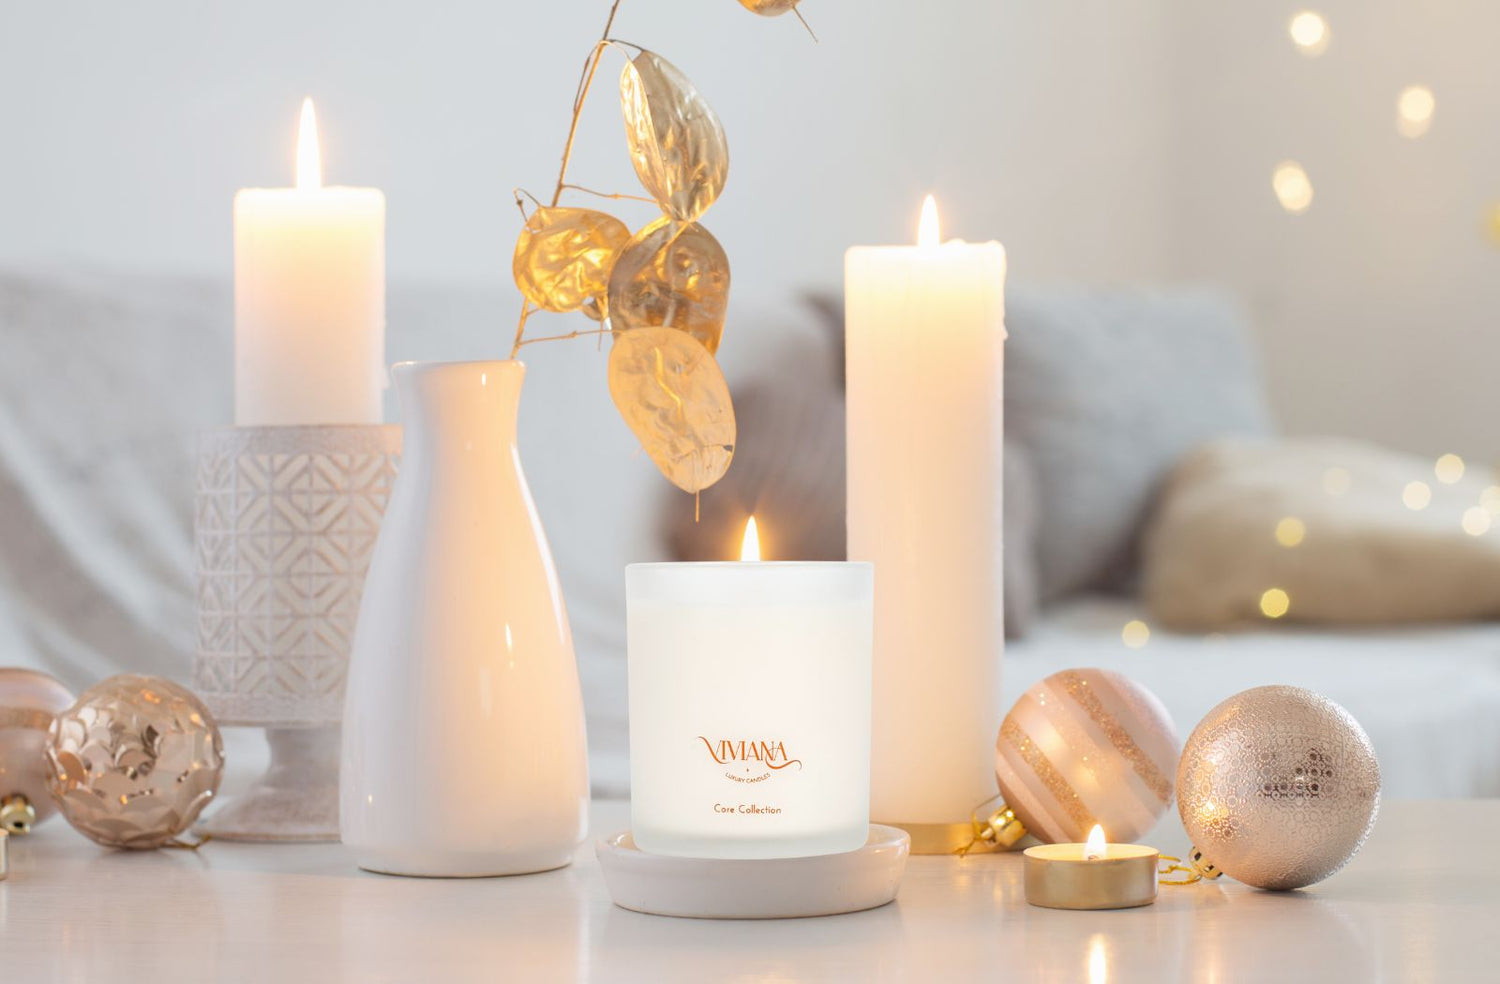 Coconut Candle: Natural Soy Wax Scented Candle – Viviana Luxury